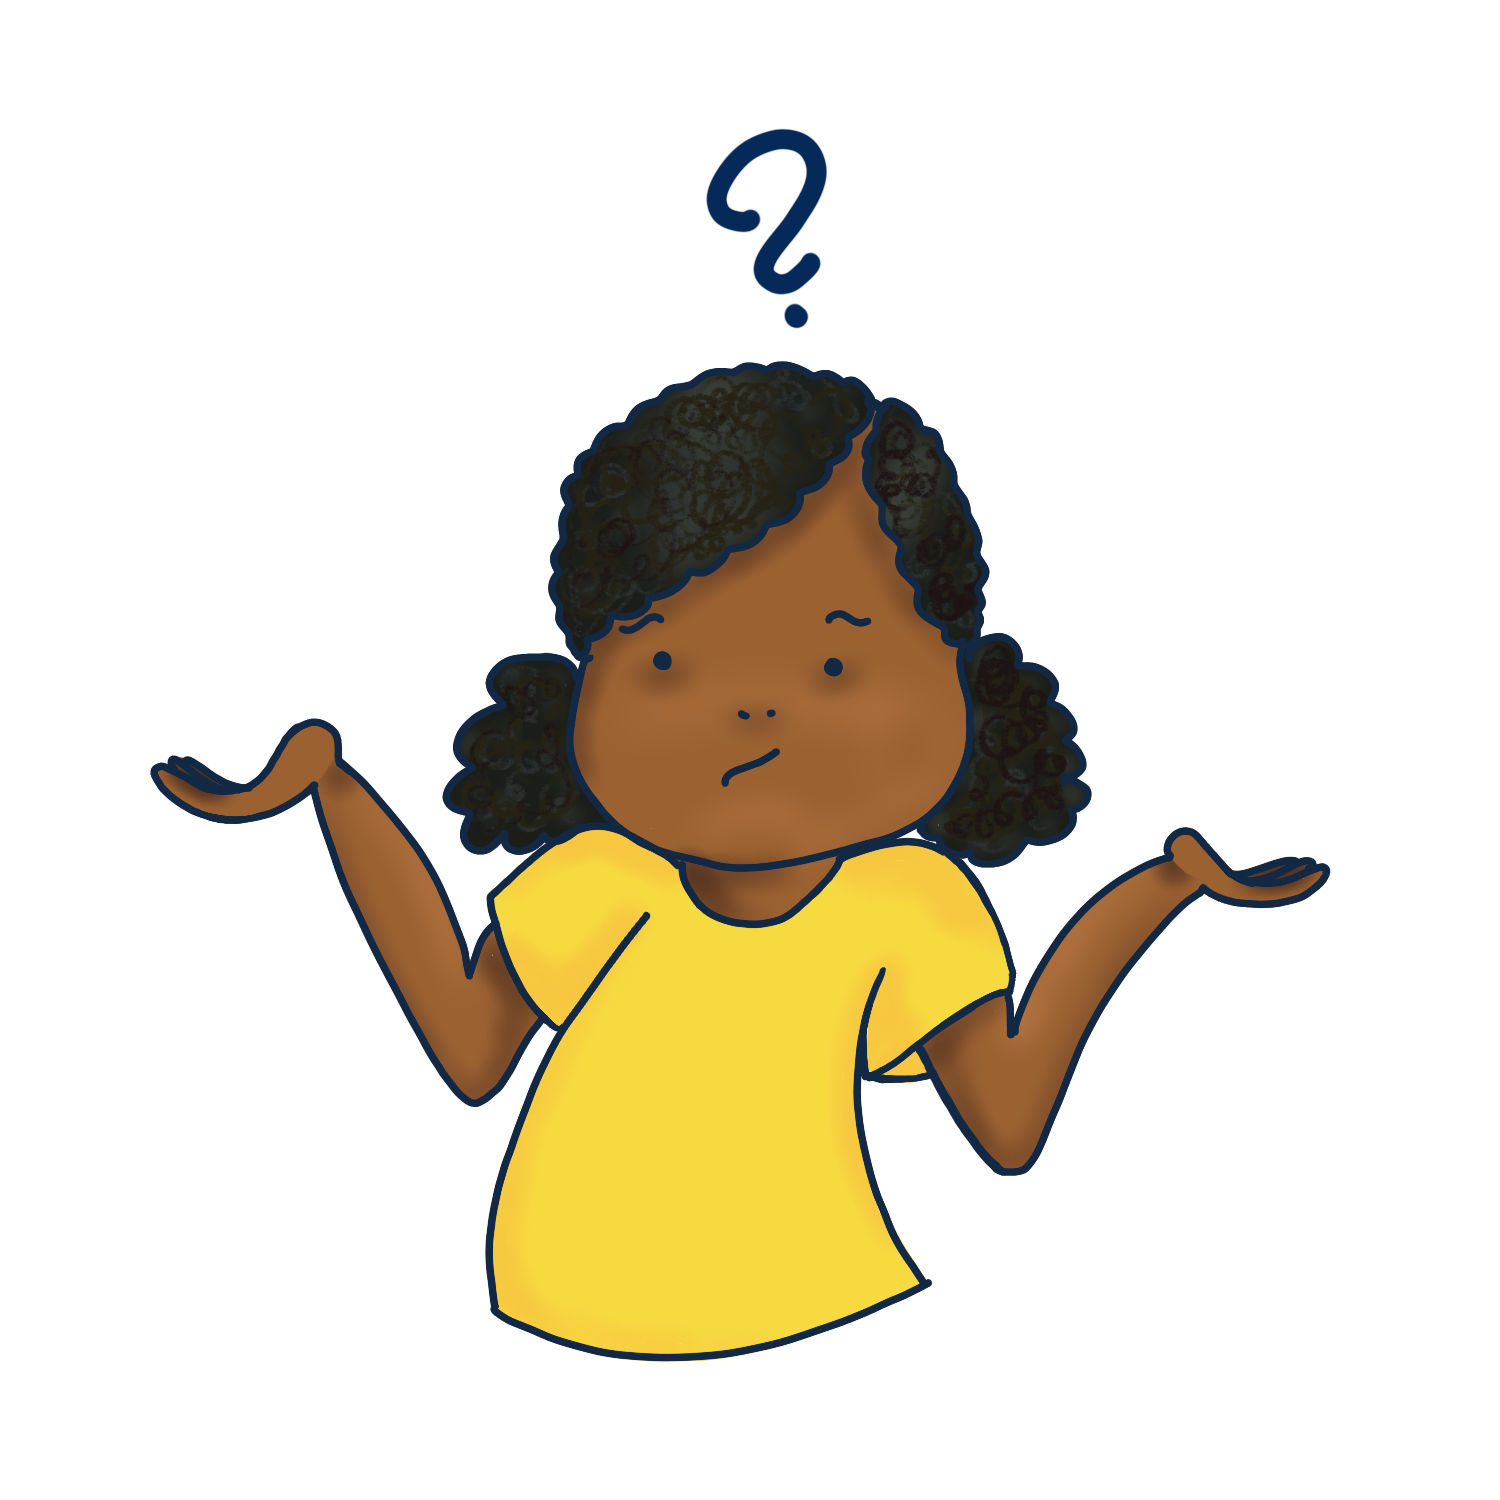 Illustration of a black girl shrugging with a question mark over her head